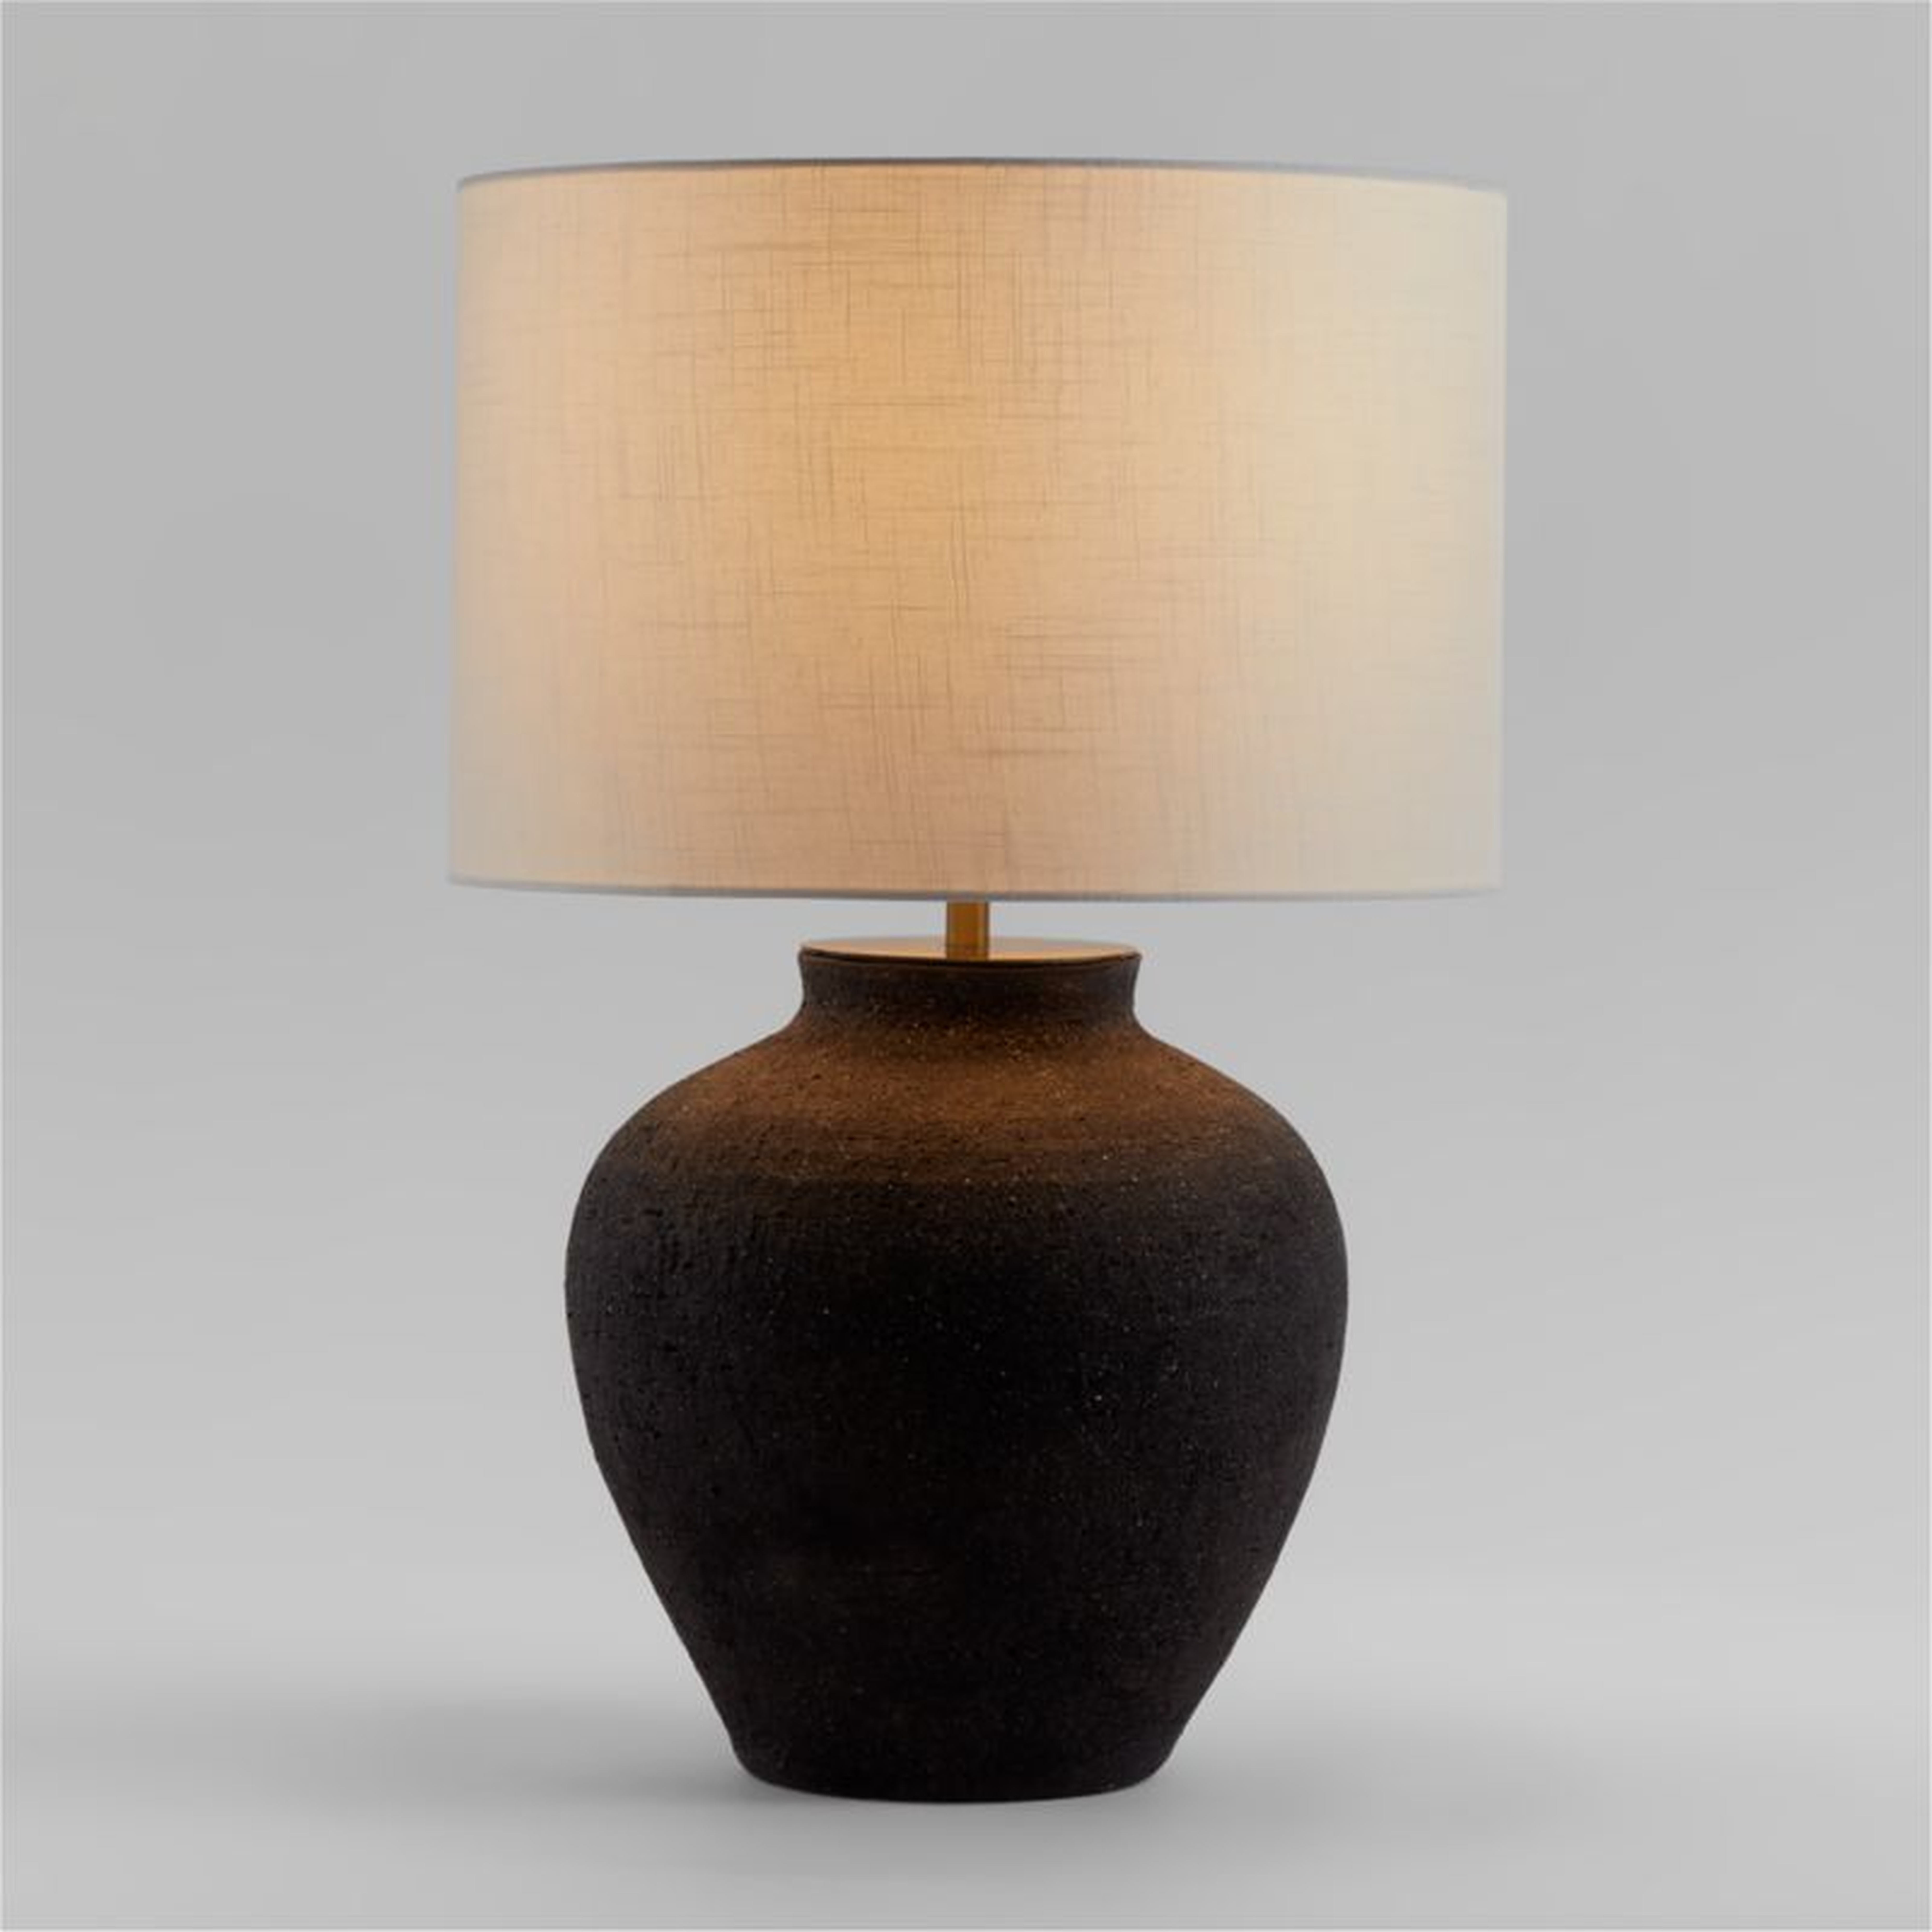 Corfu Black Table Lamp with Linen Drum Shade - Crate and Barrel